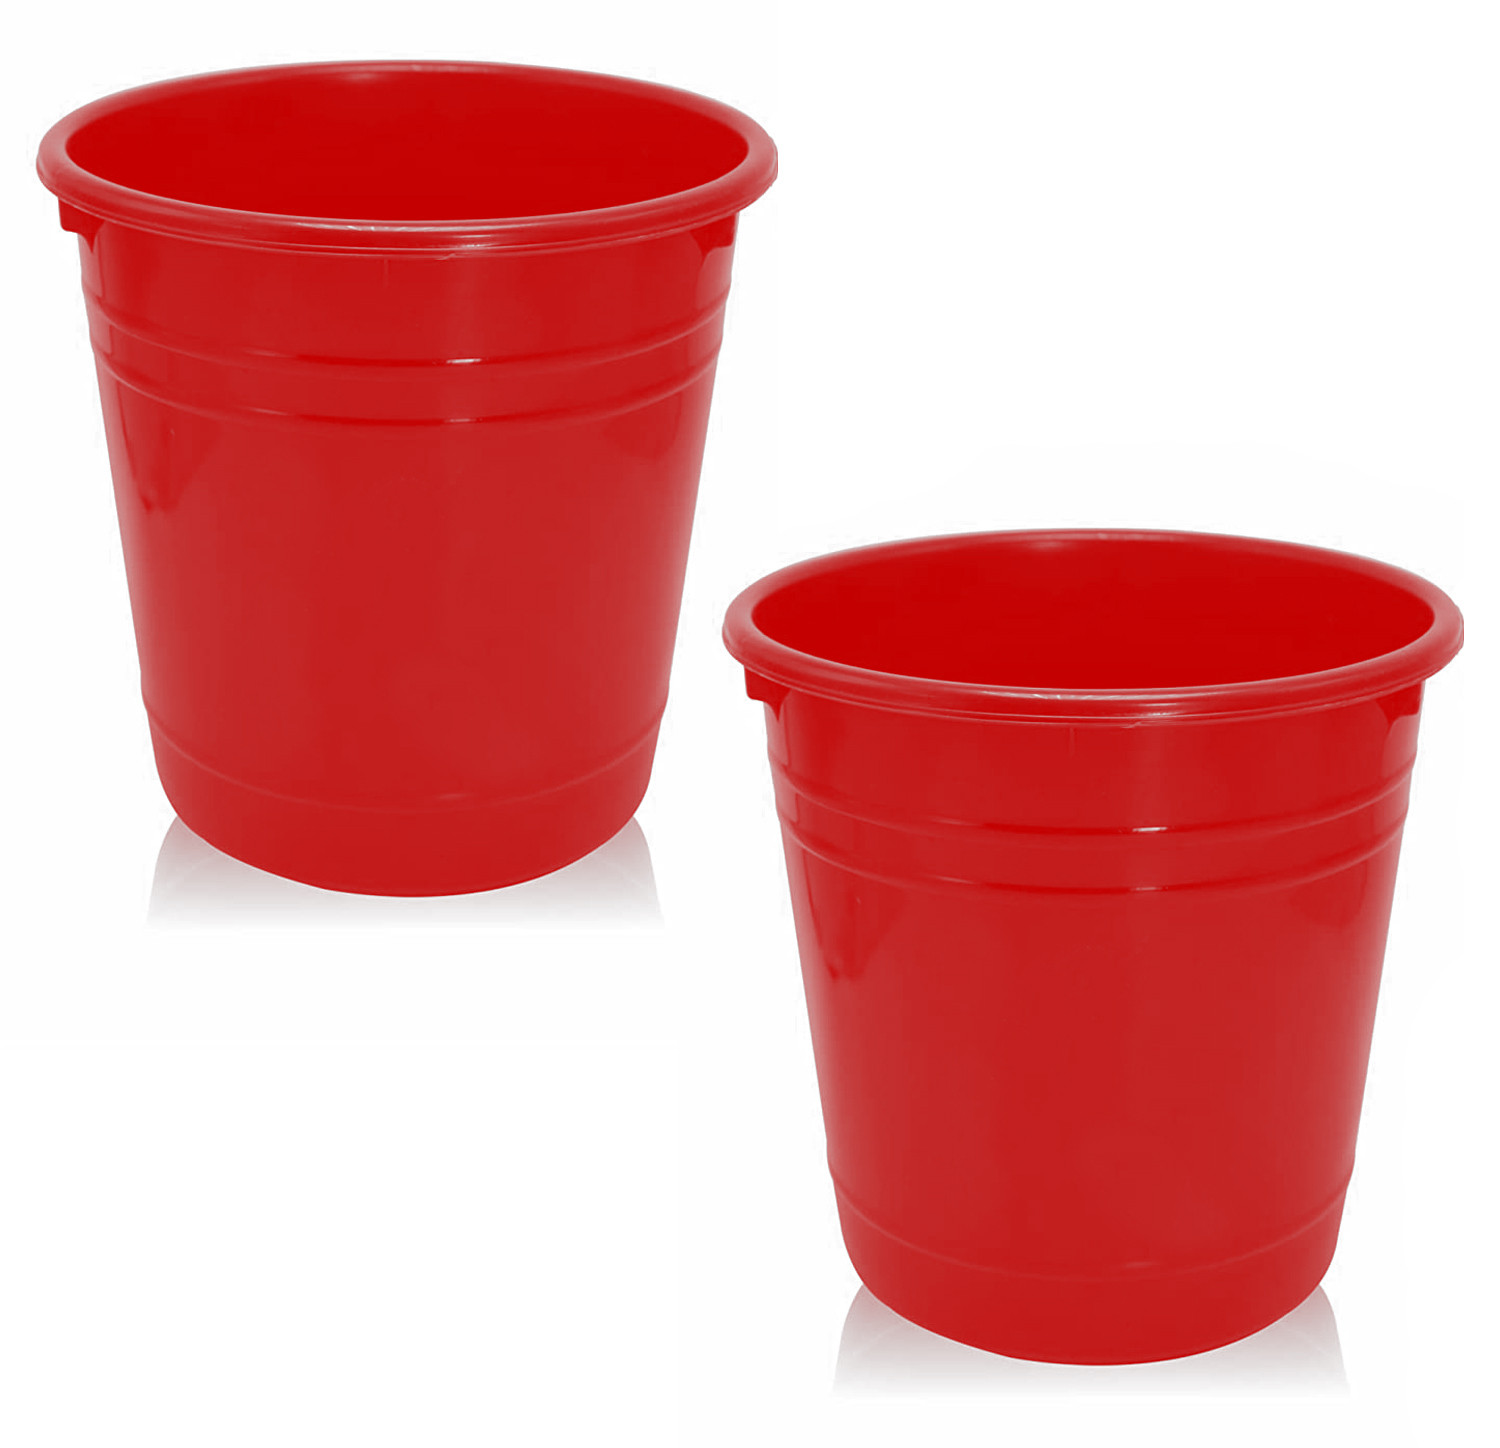 Kuber Industries Plastic Dustbin|Portable Garbage Basket & Round Trash Can for Home,Kitchen,Office,College,5 Ltr.(Red)